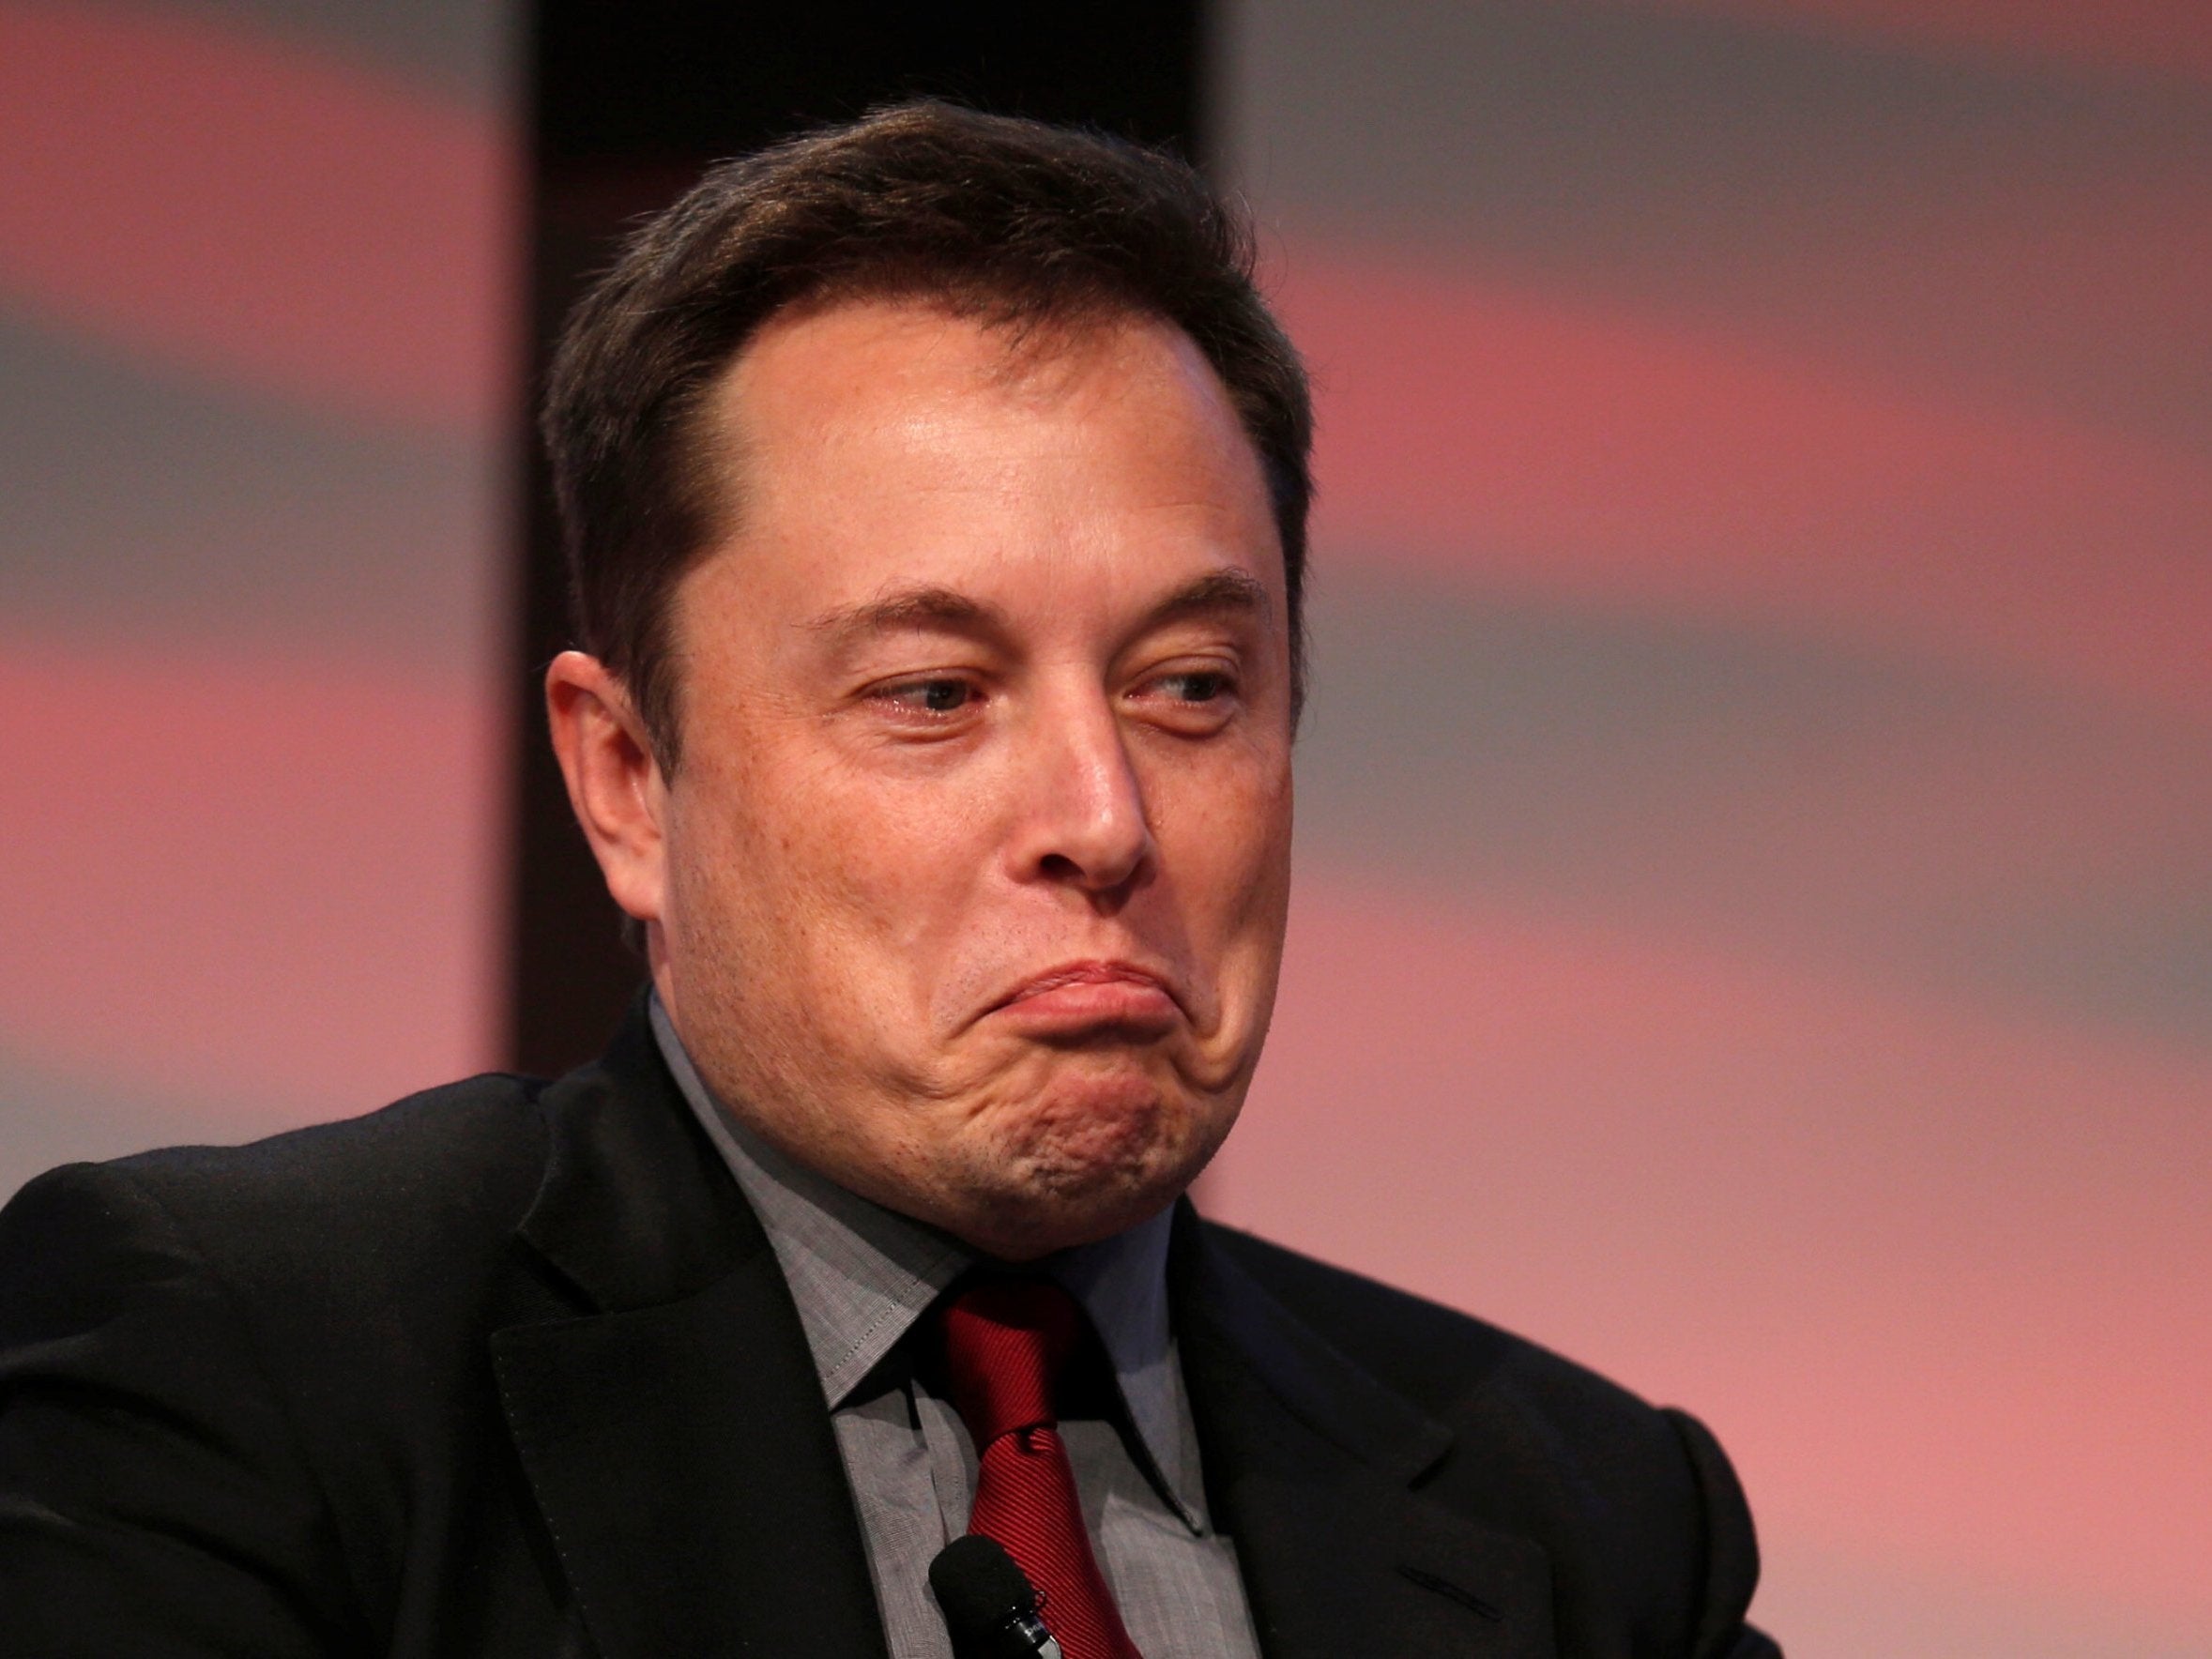 Shortly before announcing he would be taking a break from Twitter for a few days, the former Tesla chairman took veiled shots at the SEC